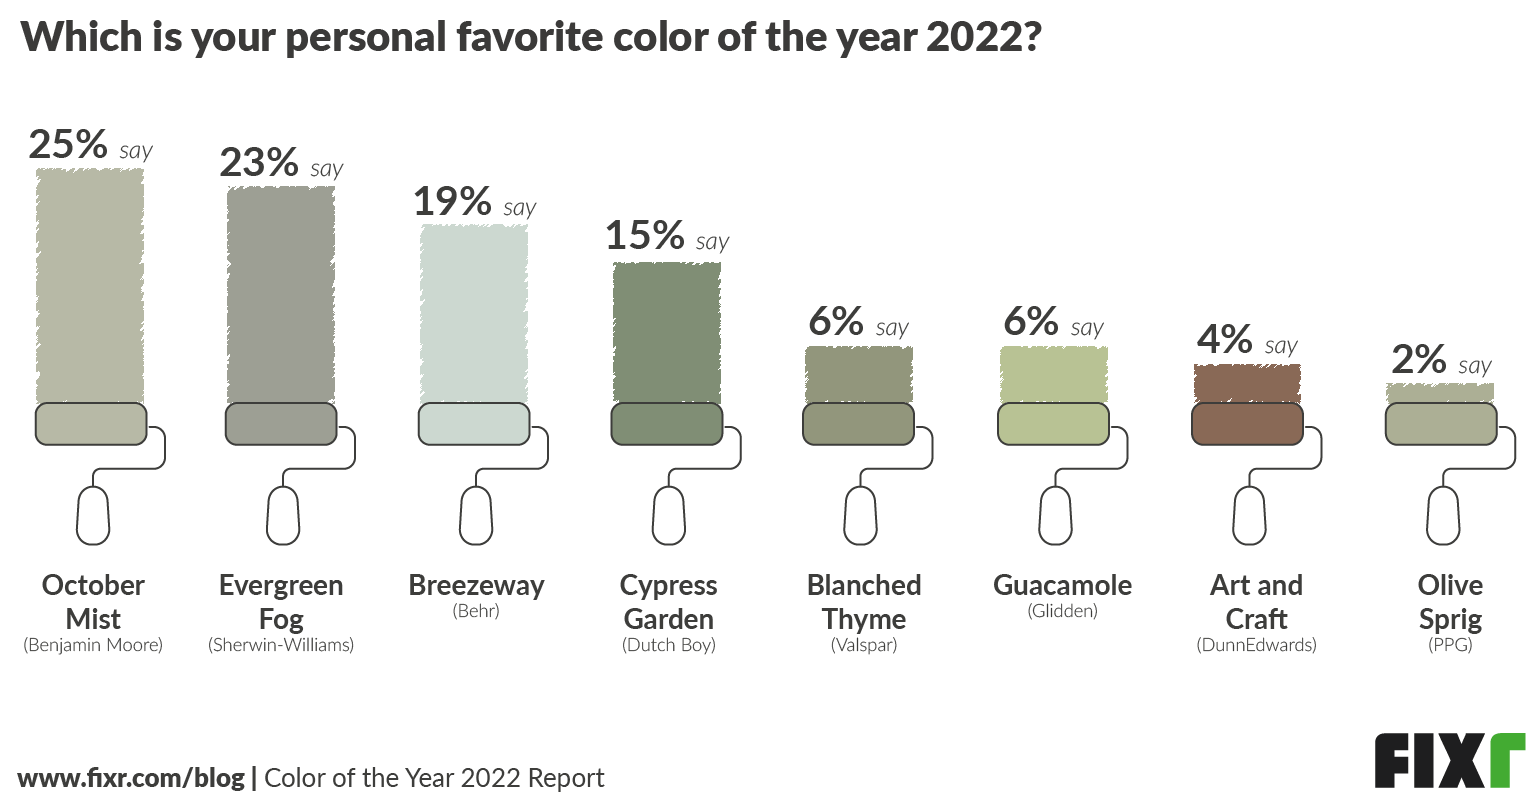 Designers' Favorite Colors of the Year 2022